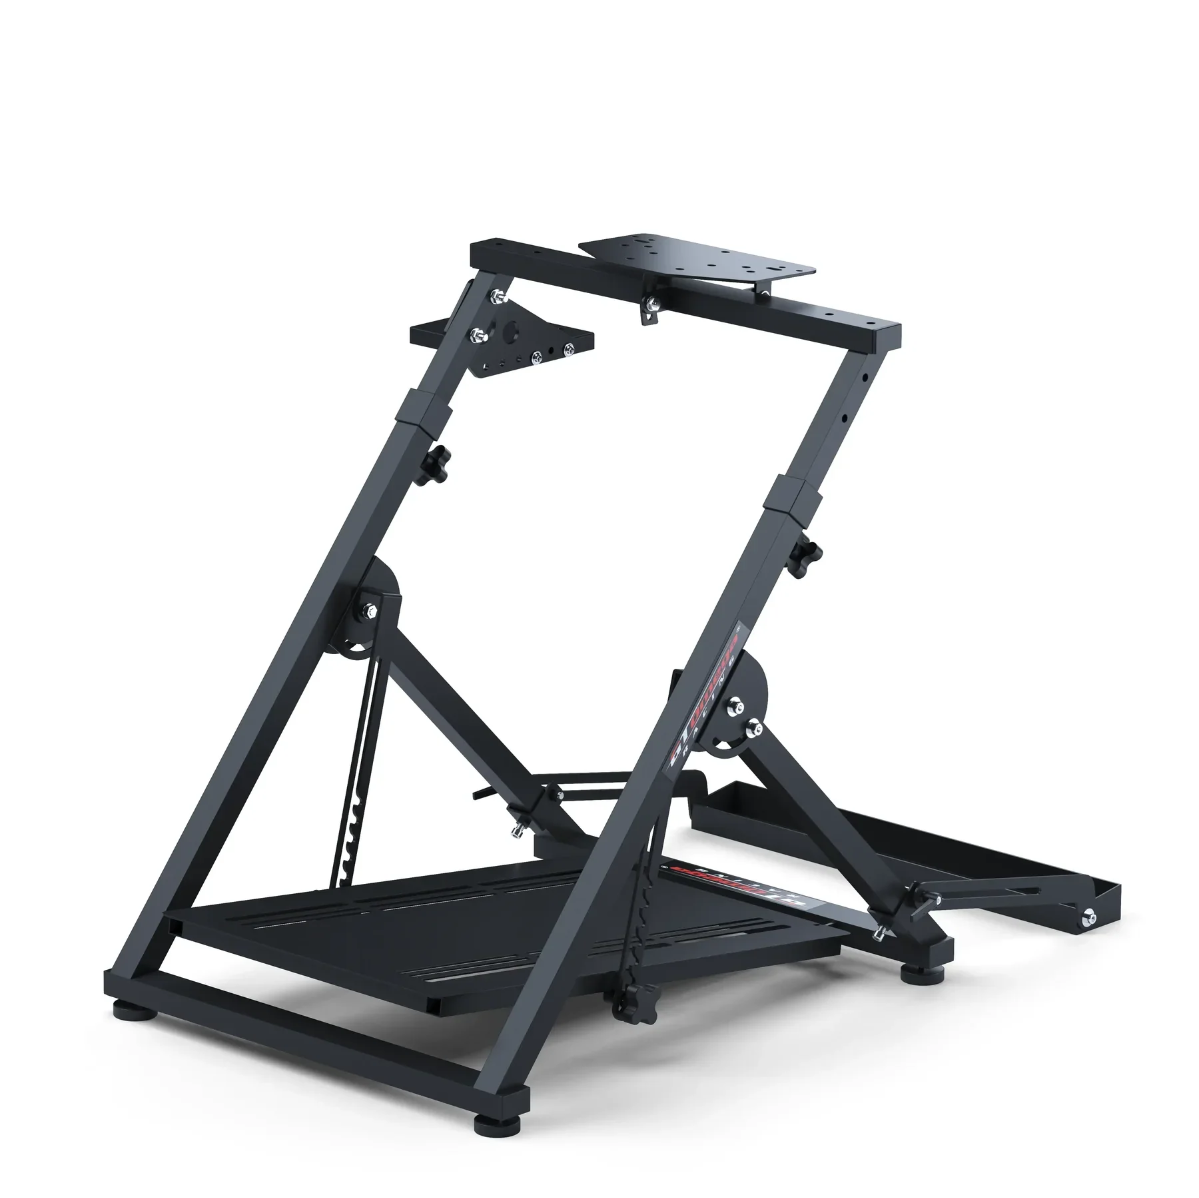 GT Omega Apex Steering Wheel Stand & Rear Seat Frame - PC Sim Racing Rig Cockpit